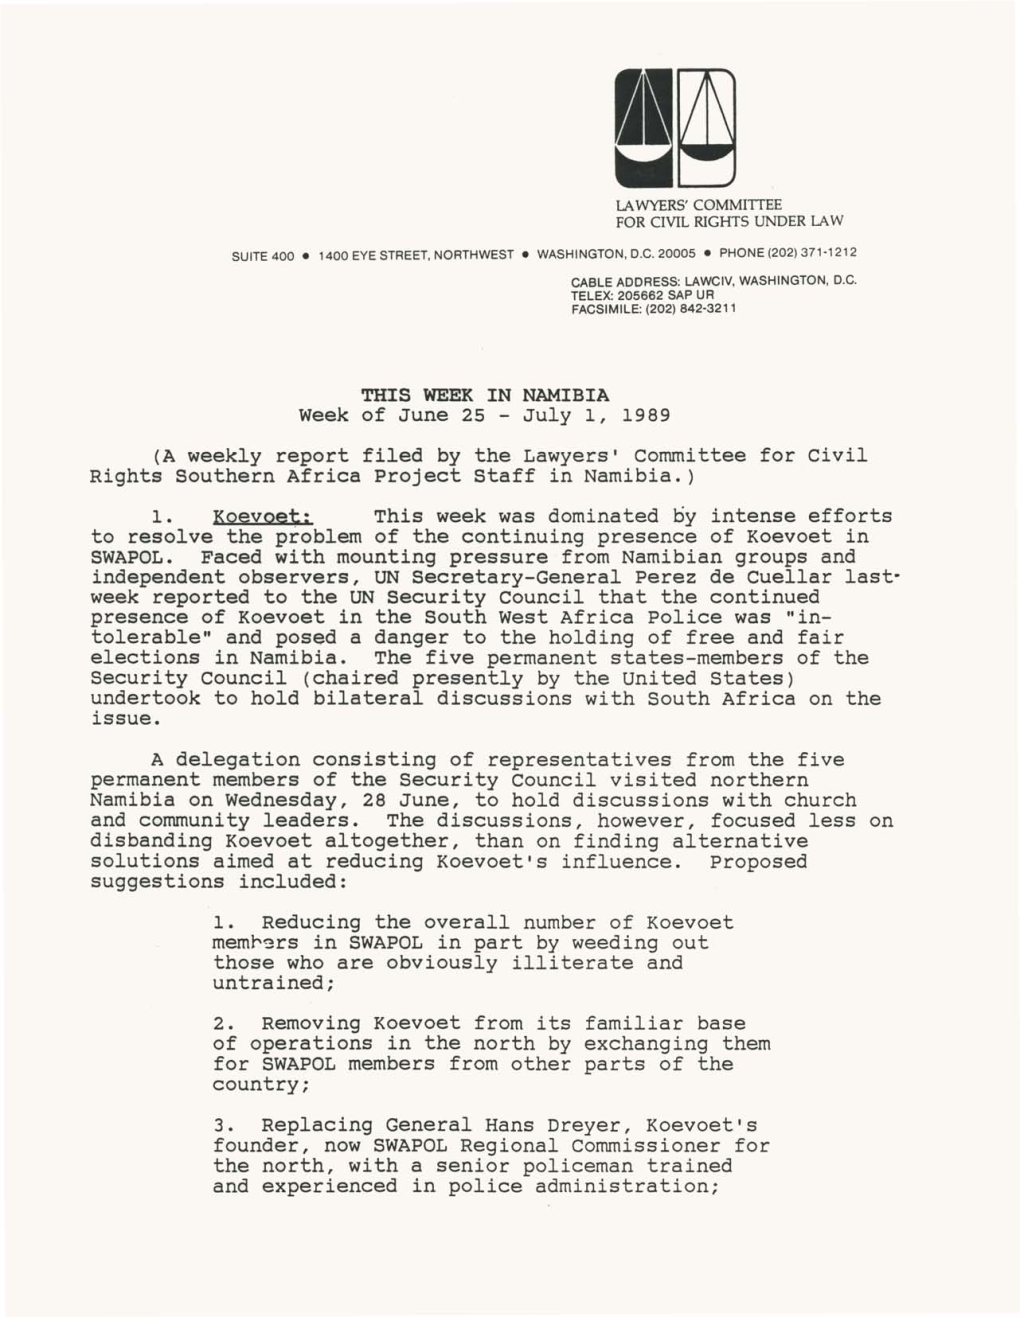 THIS WEEK in NAMIBIA Week of June 25 - July 1, 1989 (A Weekly Report Filed by the Lawyers' Committee for Civil Rights Southern Africa Project Staff in Namibia.)